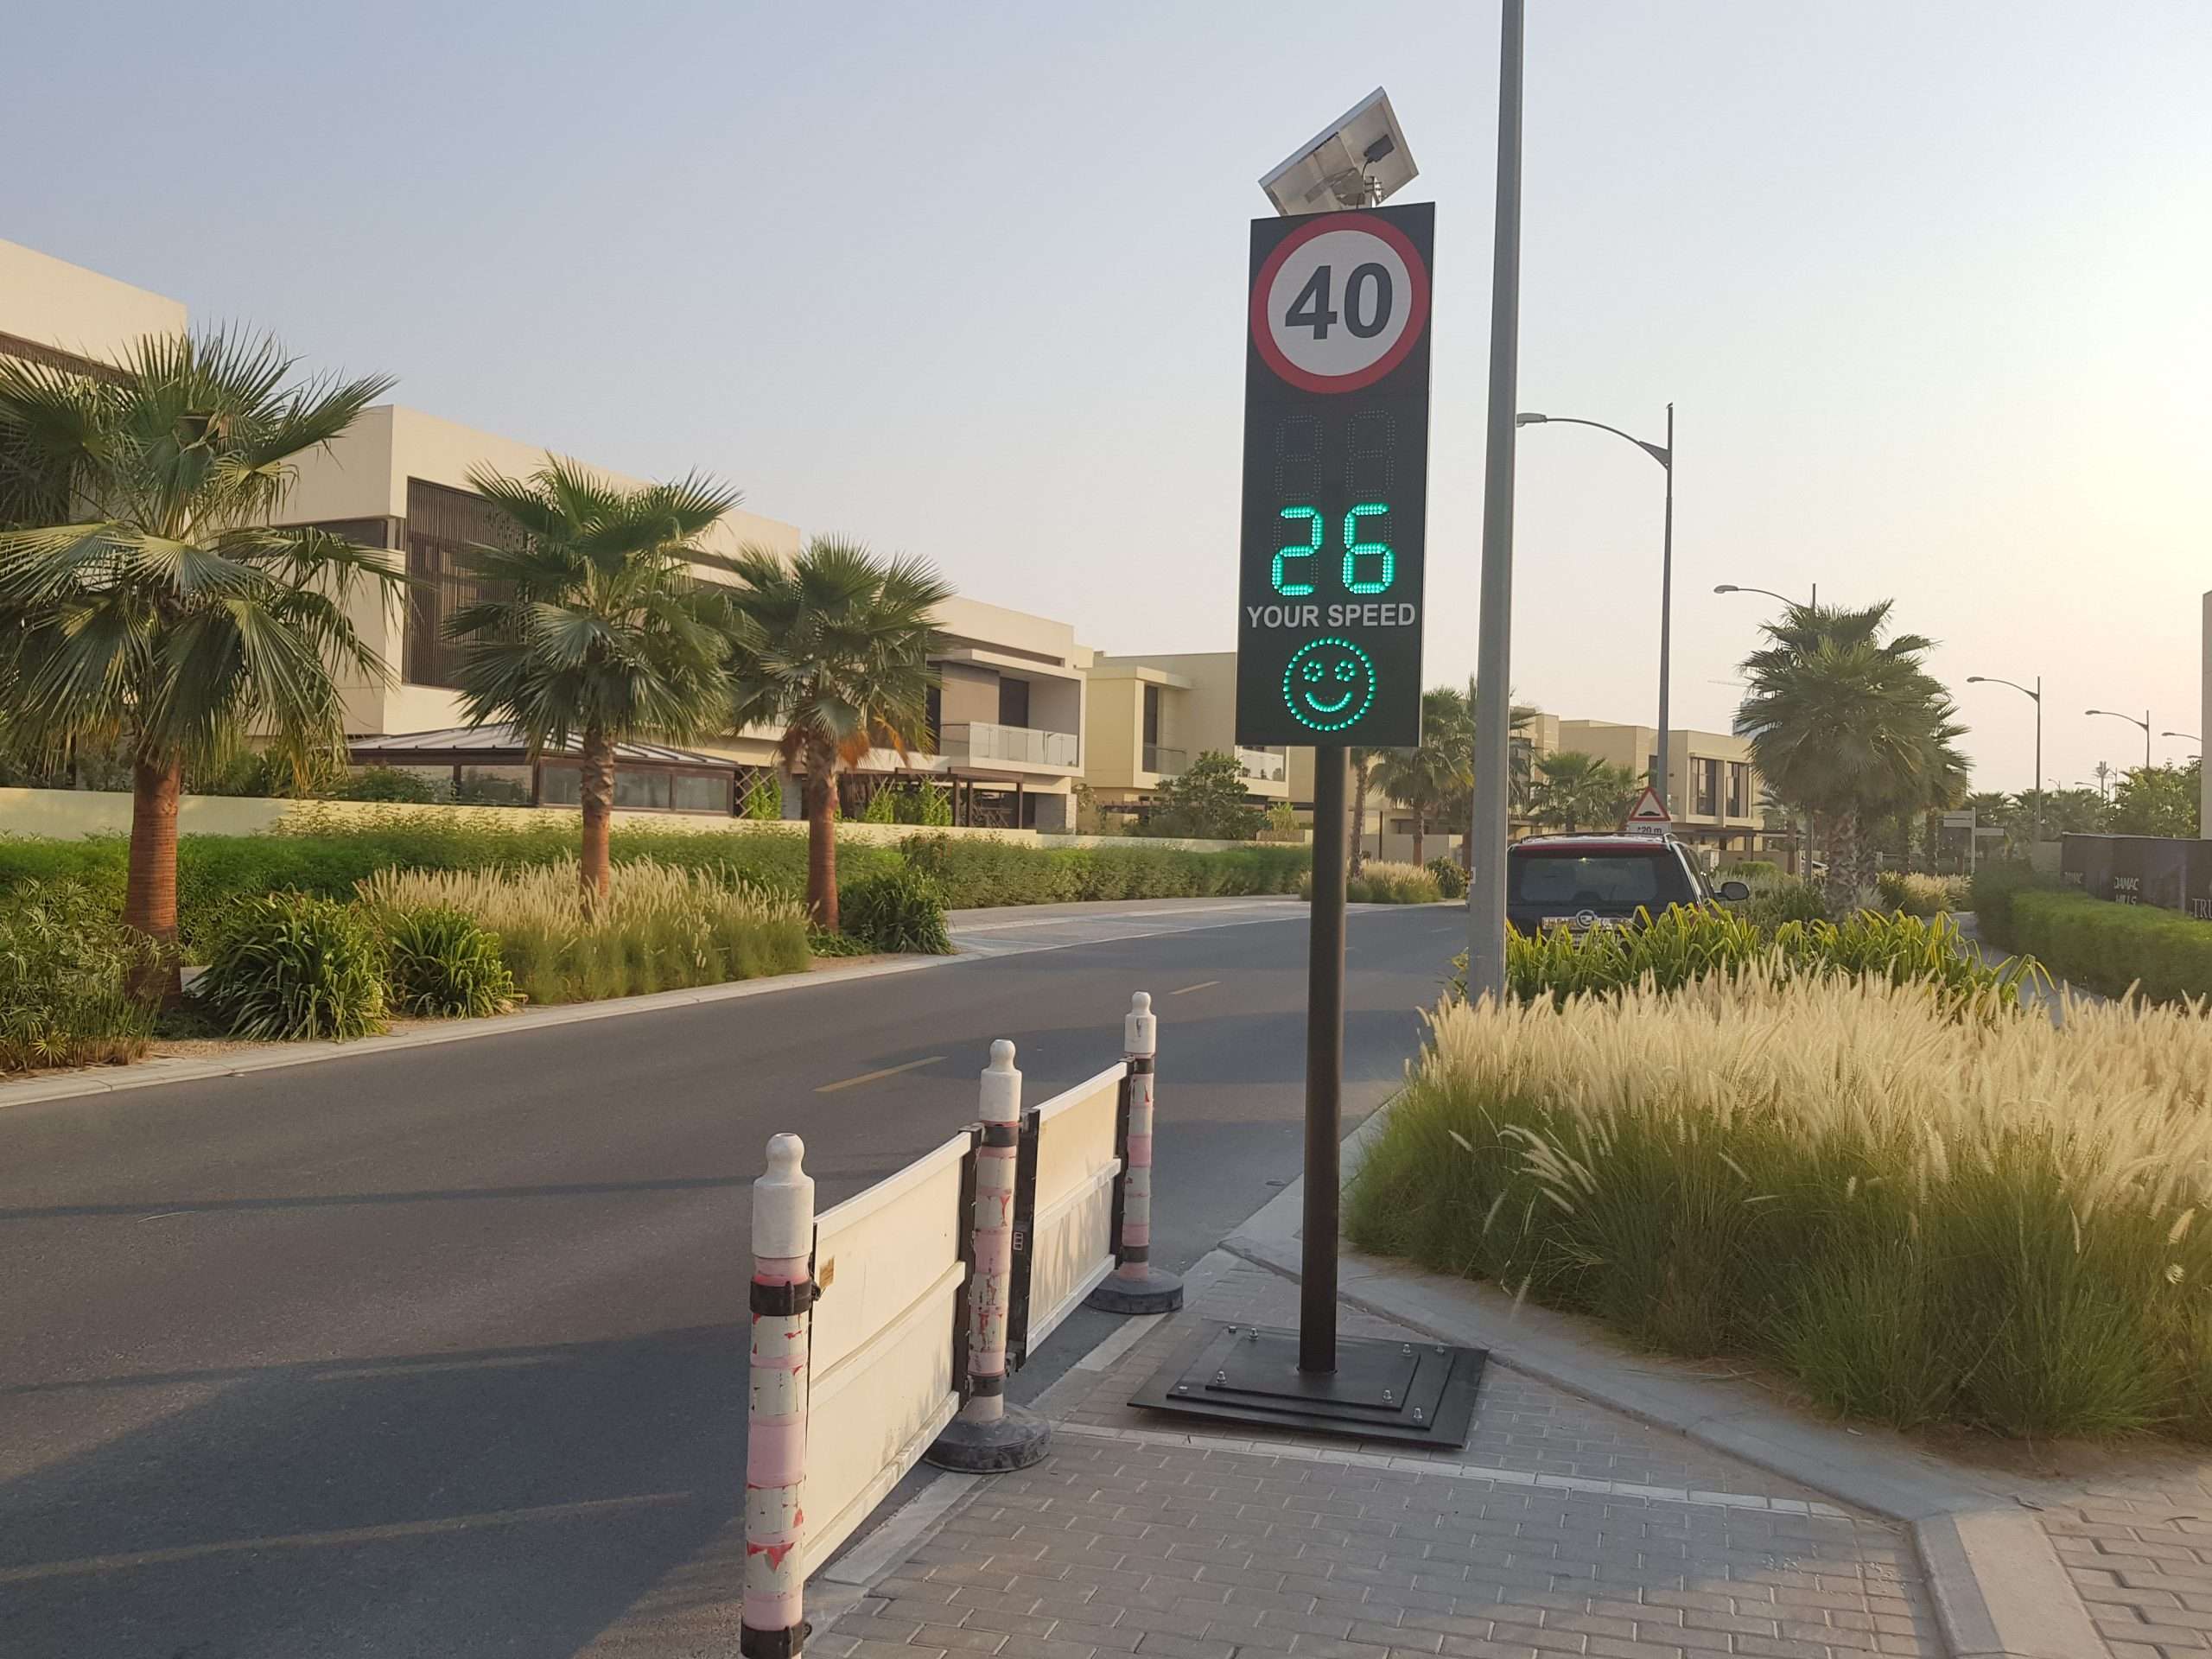 Radar Speed Limit Sign with Face & Speed Limit